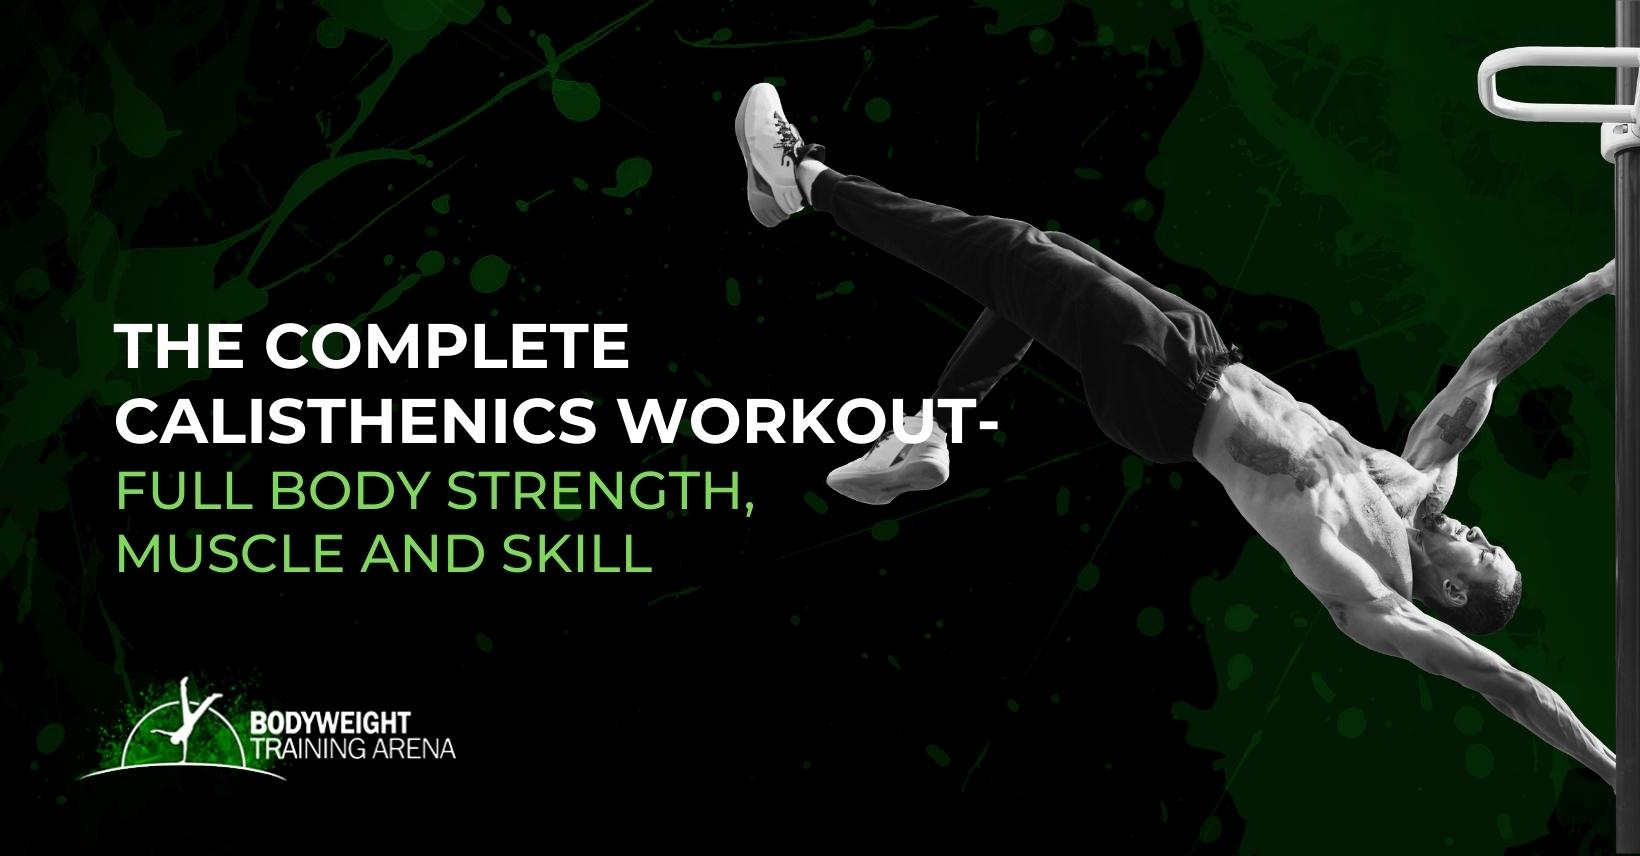 The Complete Calisthenics Workout – Strength, Muscle and Skills